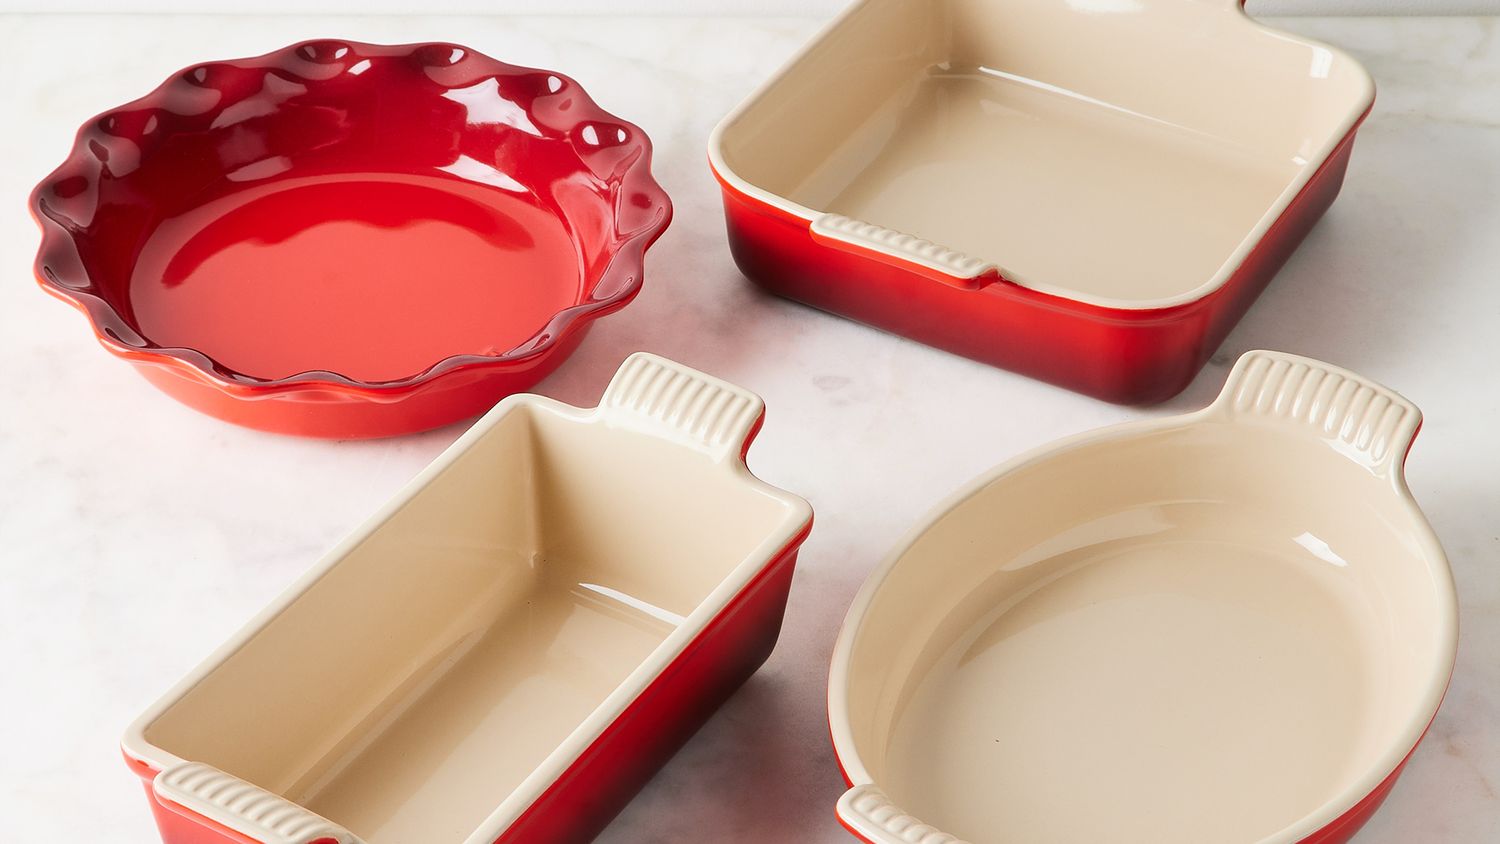 Le Creuset Heritage Square Baking Dishes - Set of 2 - White